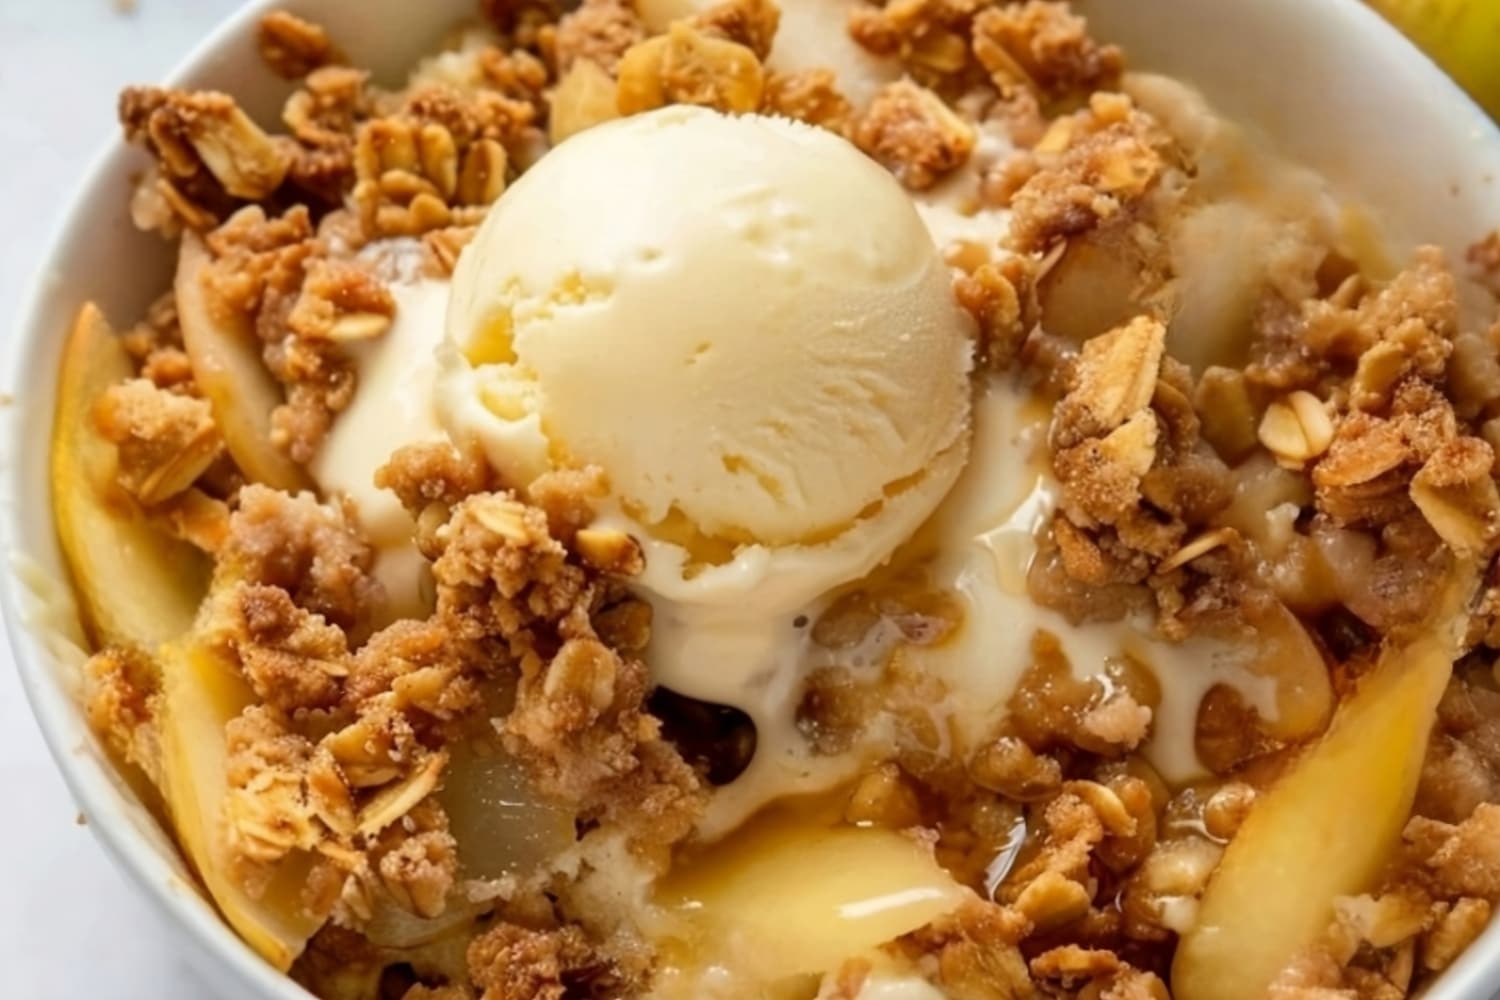 Bowl of pear crisp with ice cream on top.